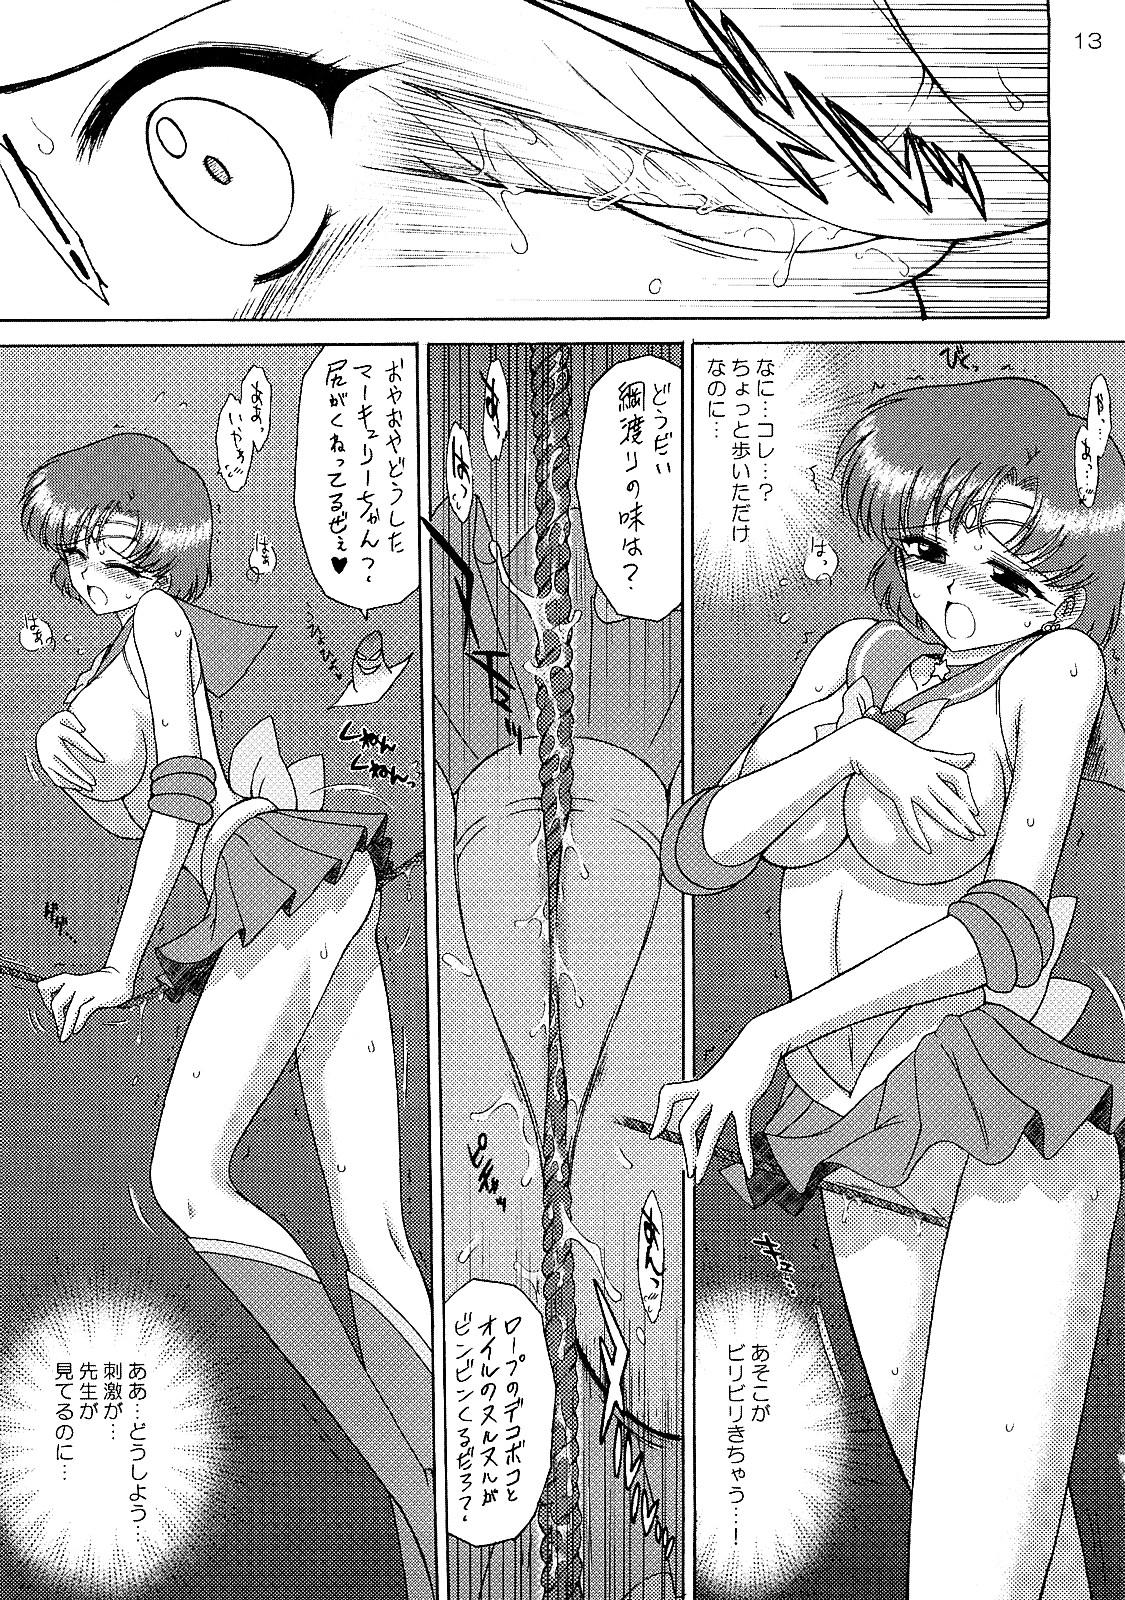 Unshaved Sky High - Sailor moon Indo - Page 12